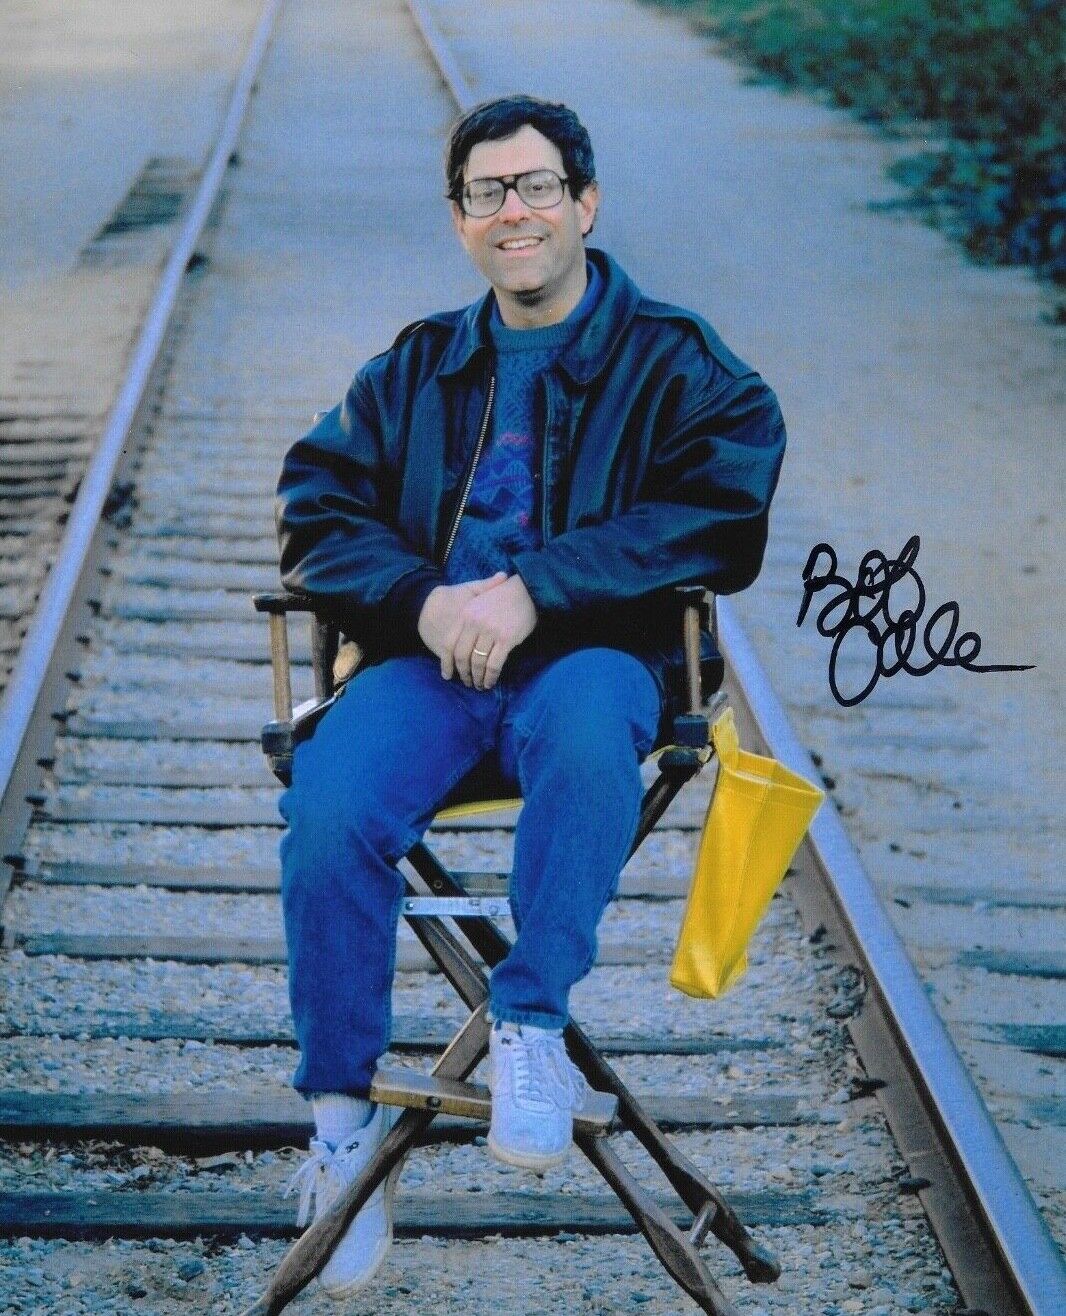 * BOB GALE * signed 8x10 Photo Poster painting * BACK TO THE FUTURE * WRITER/PRODUCER * COA * 3